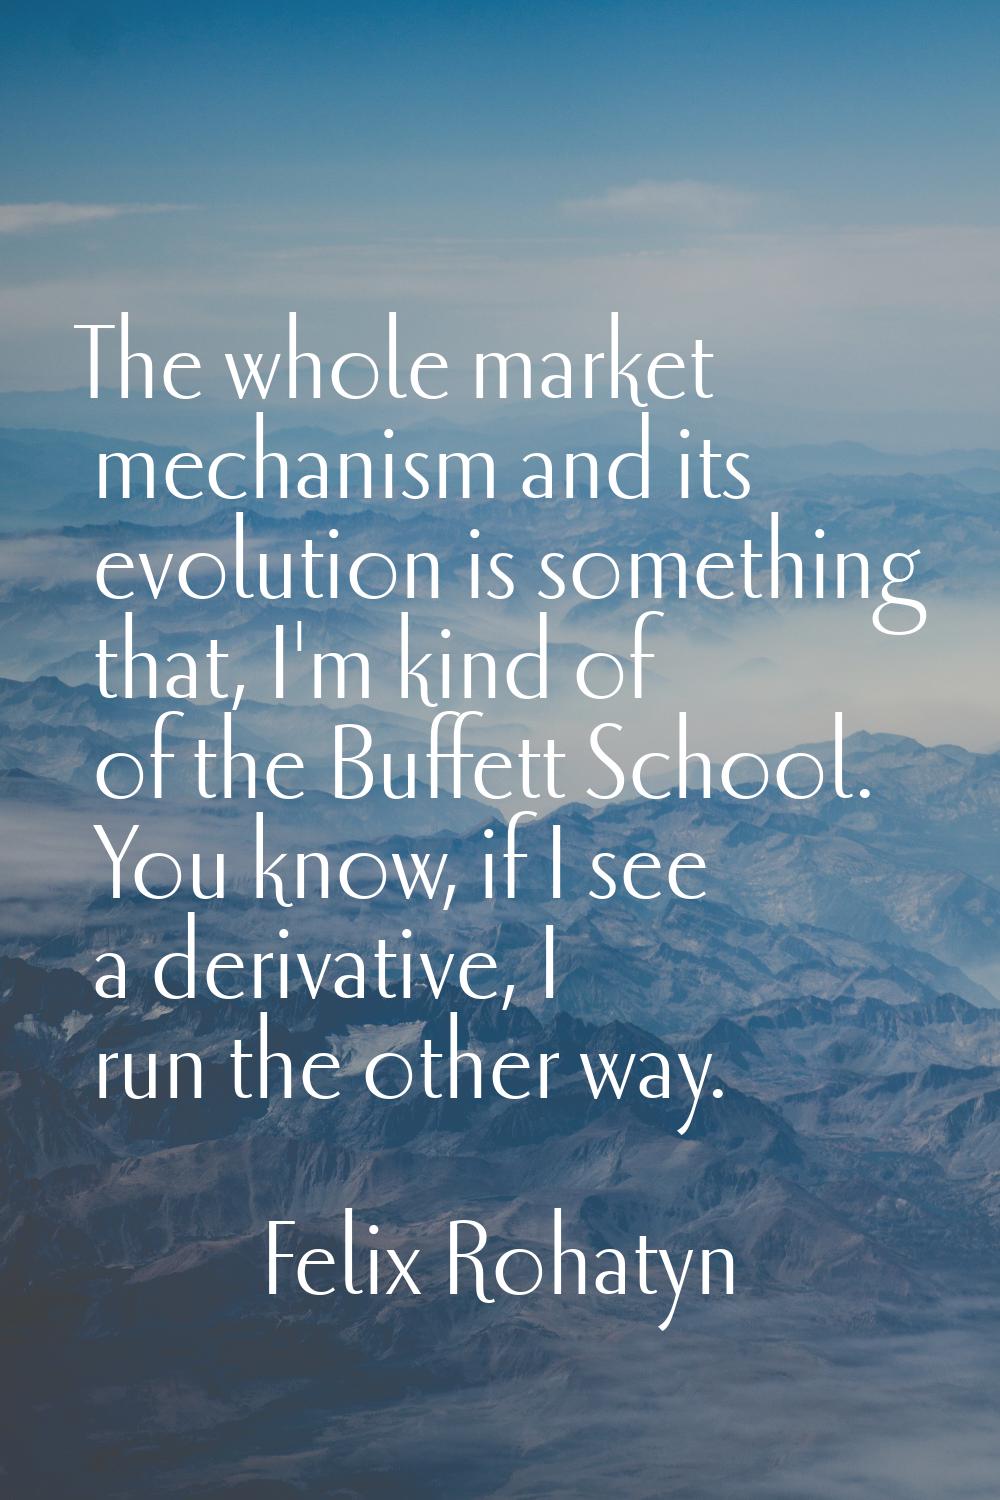 The whole market mechanism and its evolution is something that, I'm kind of of the Buffett School. 